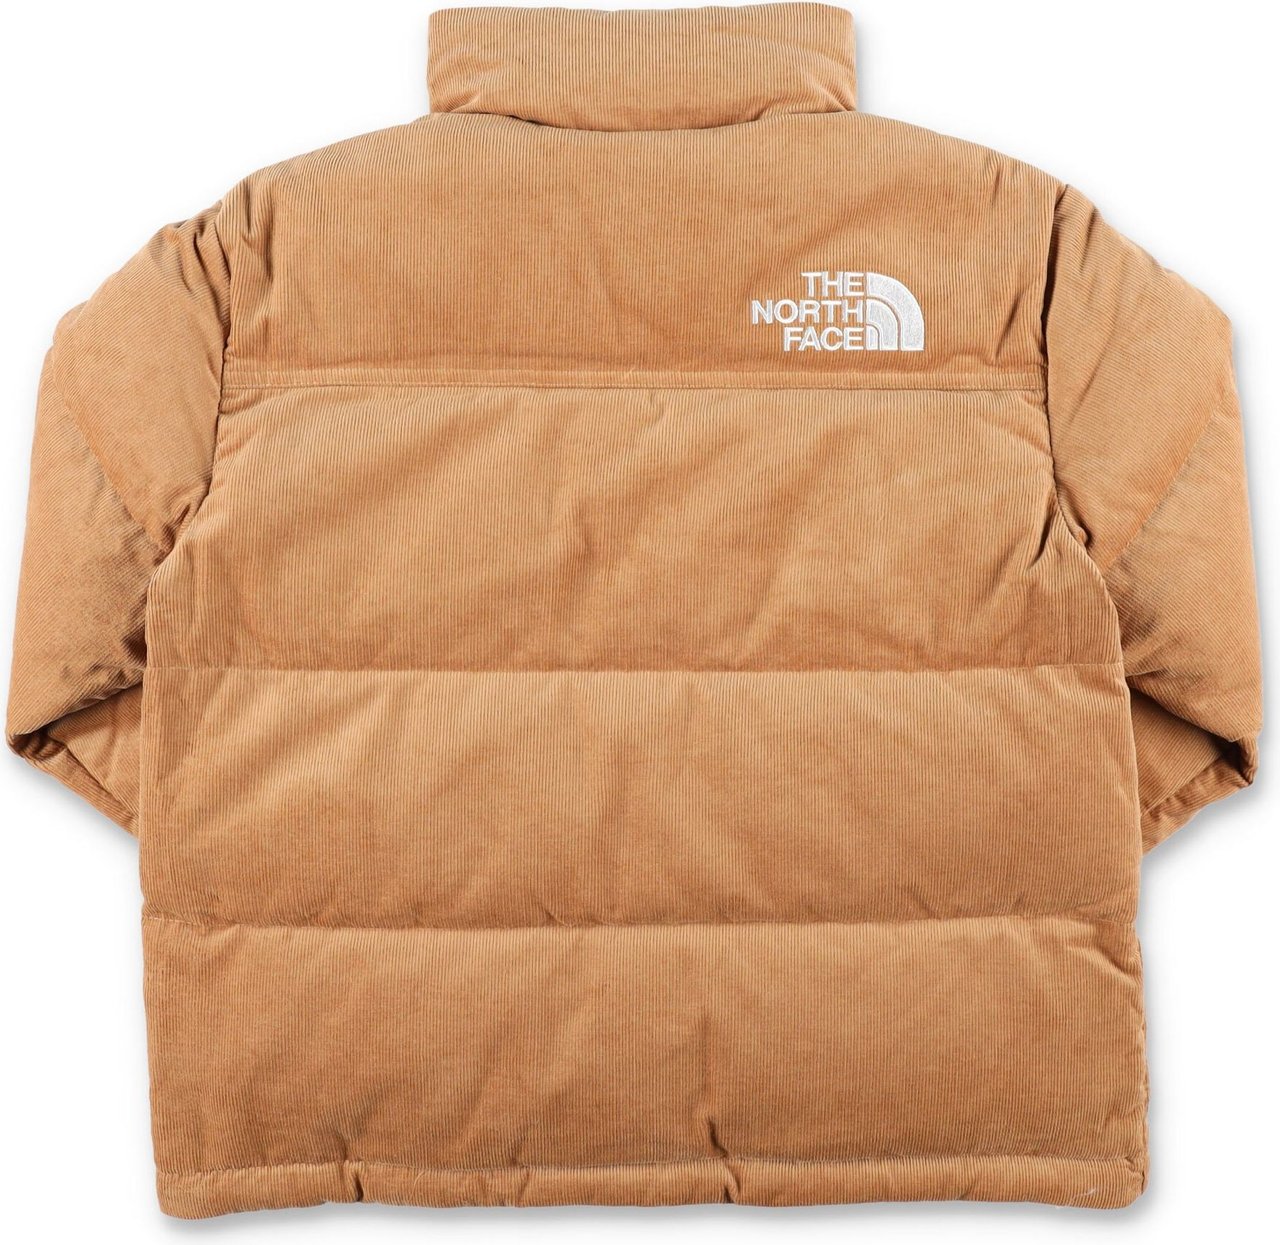 The North Face DOWNJACKET RETRO NUPZE Beige